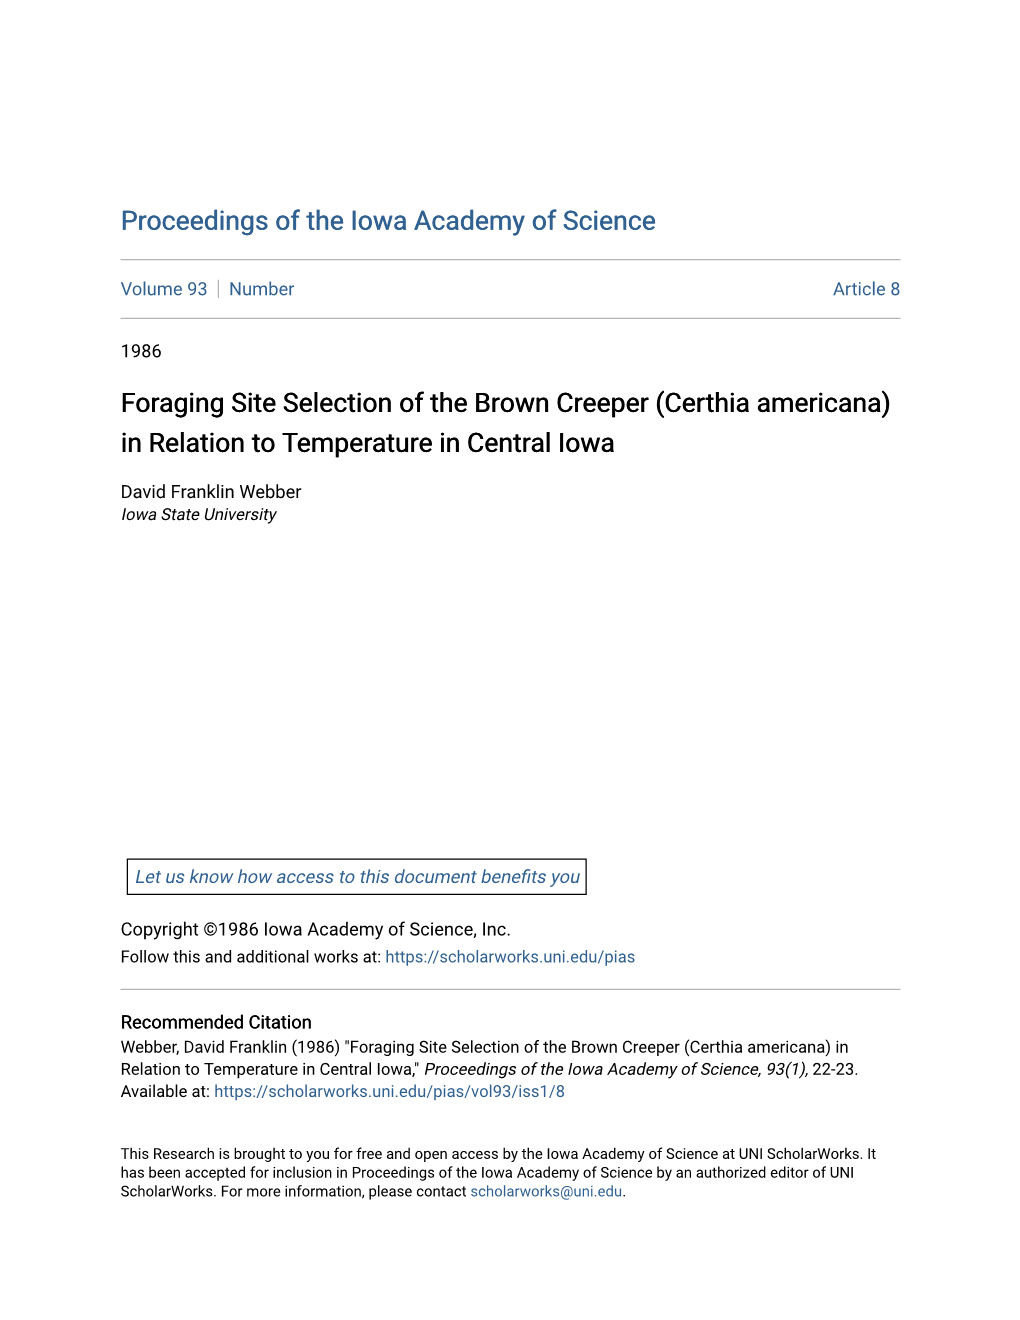 Foraging Site Selection of the Brown Creeper (Certhia Americana) in Relation to Temperature in Central Iowa